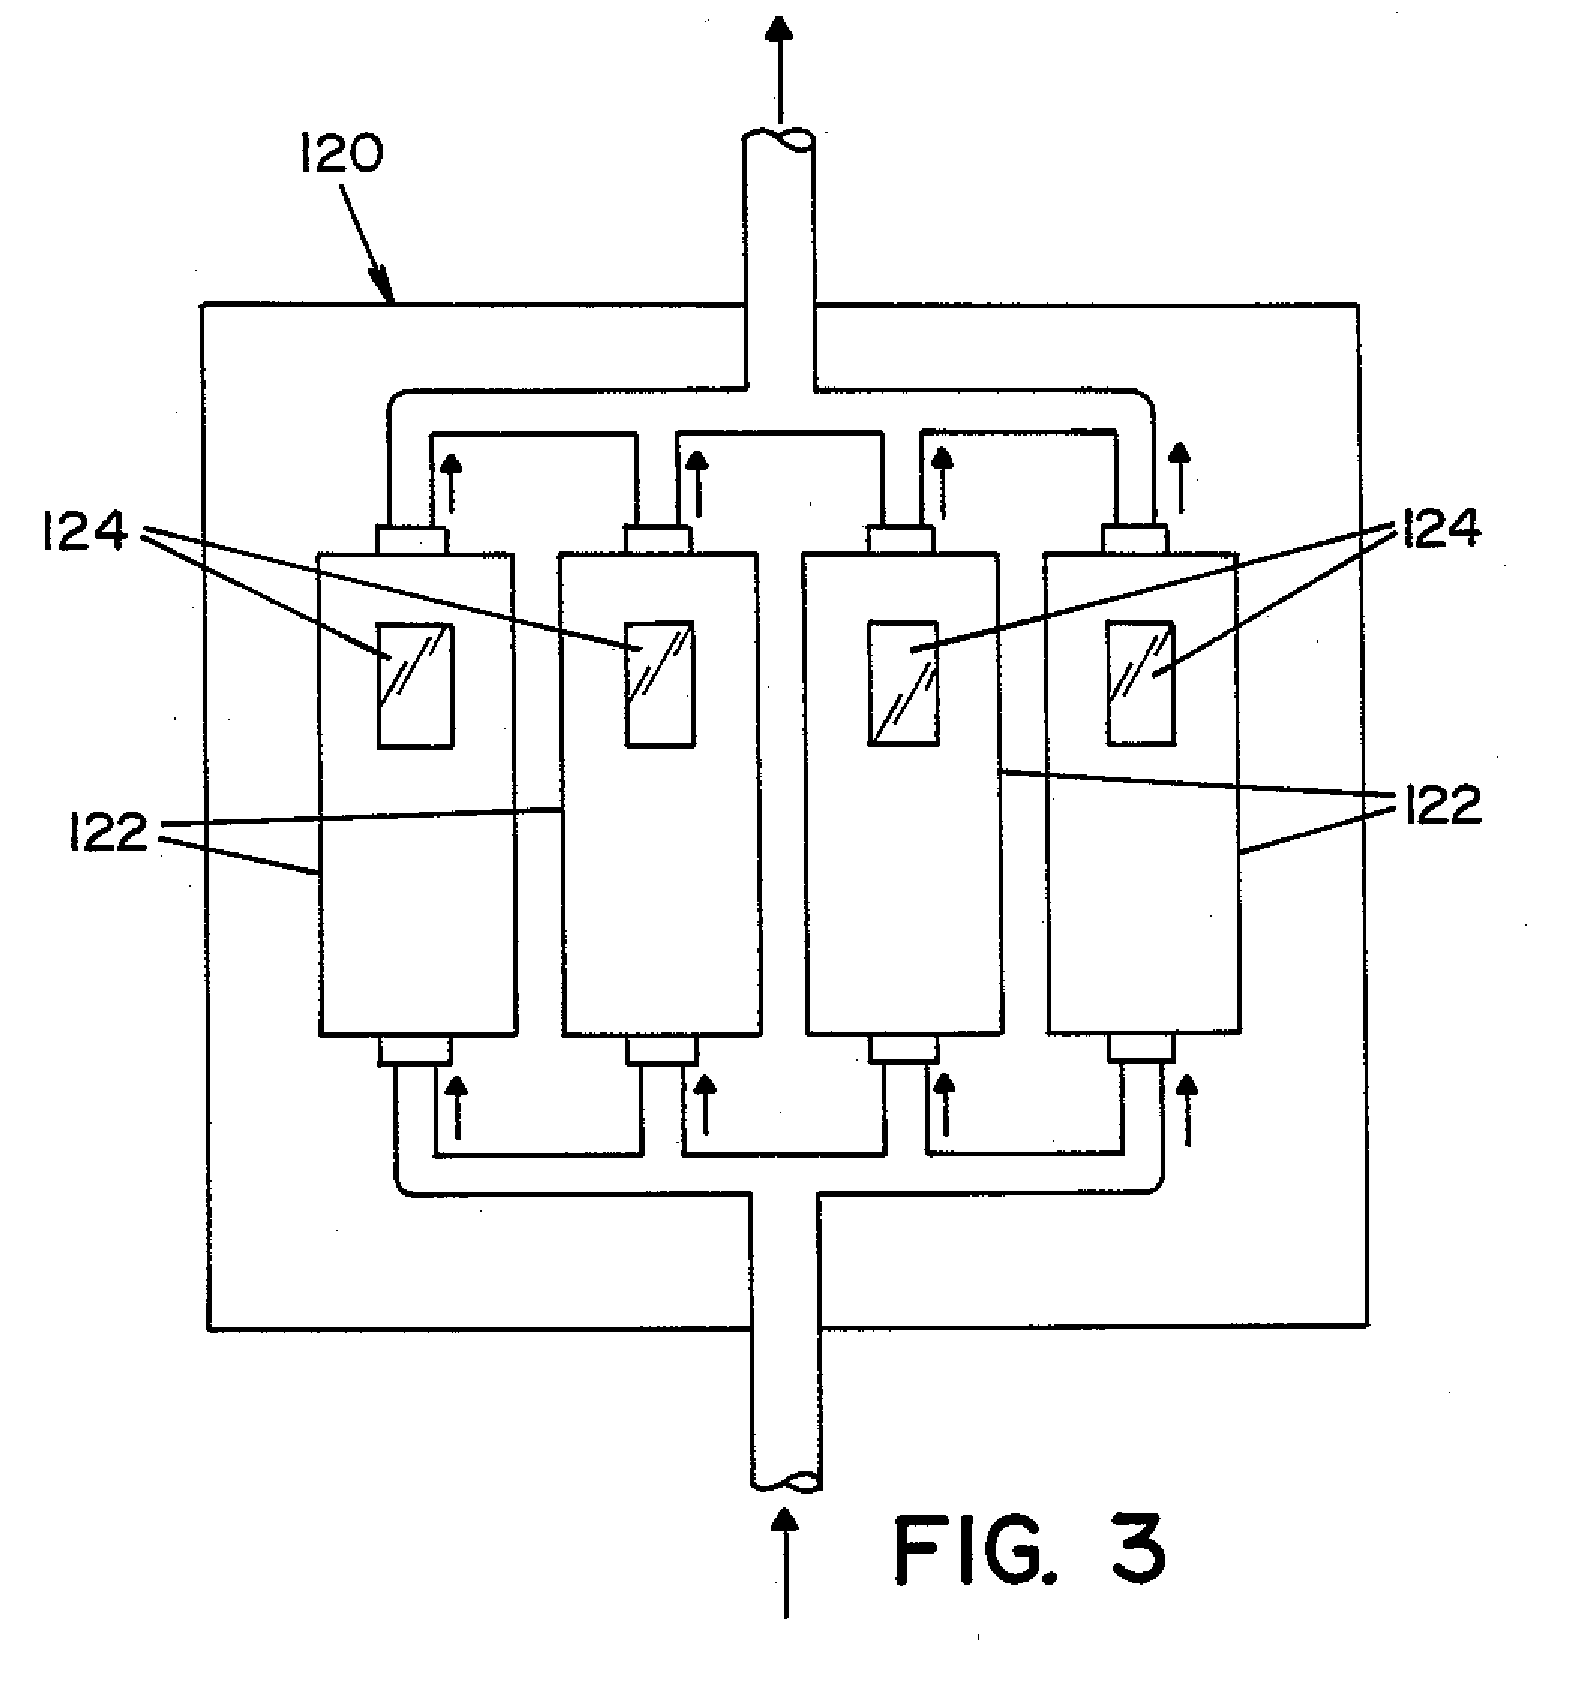 Method and apparatus for removal of vaporized hydrogen peroxide from a region